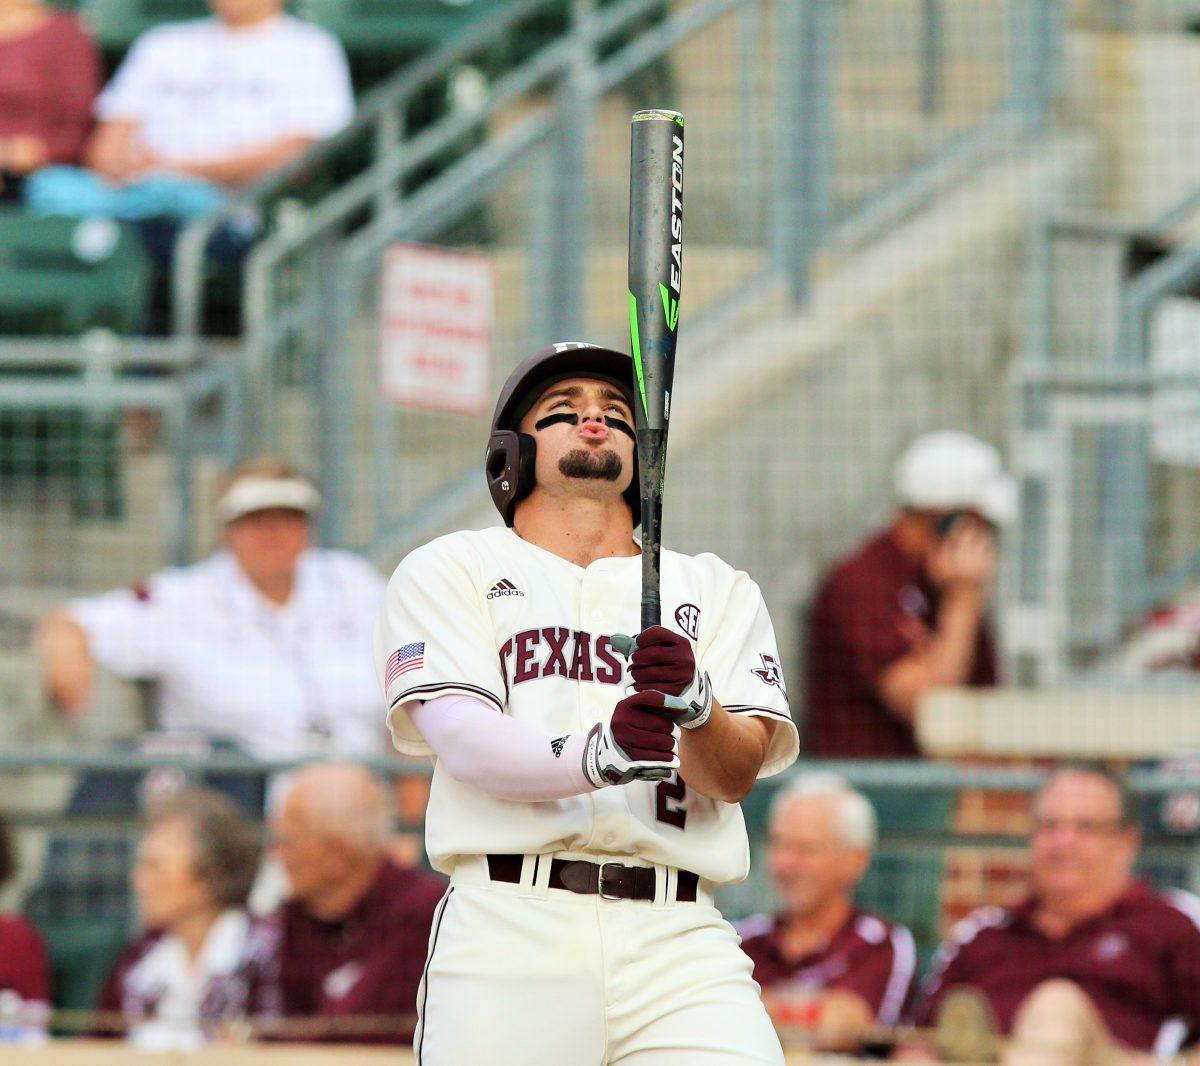 Ryne Birk hit his fourth home run of the season and scored three runs for the Aggies in their sweep of Georgia.